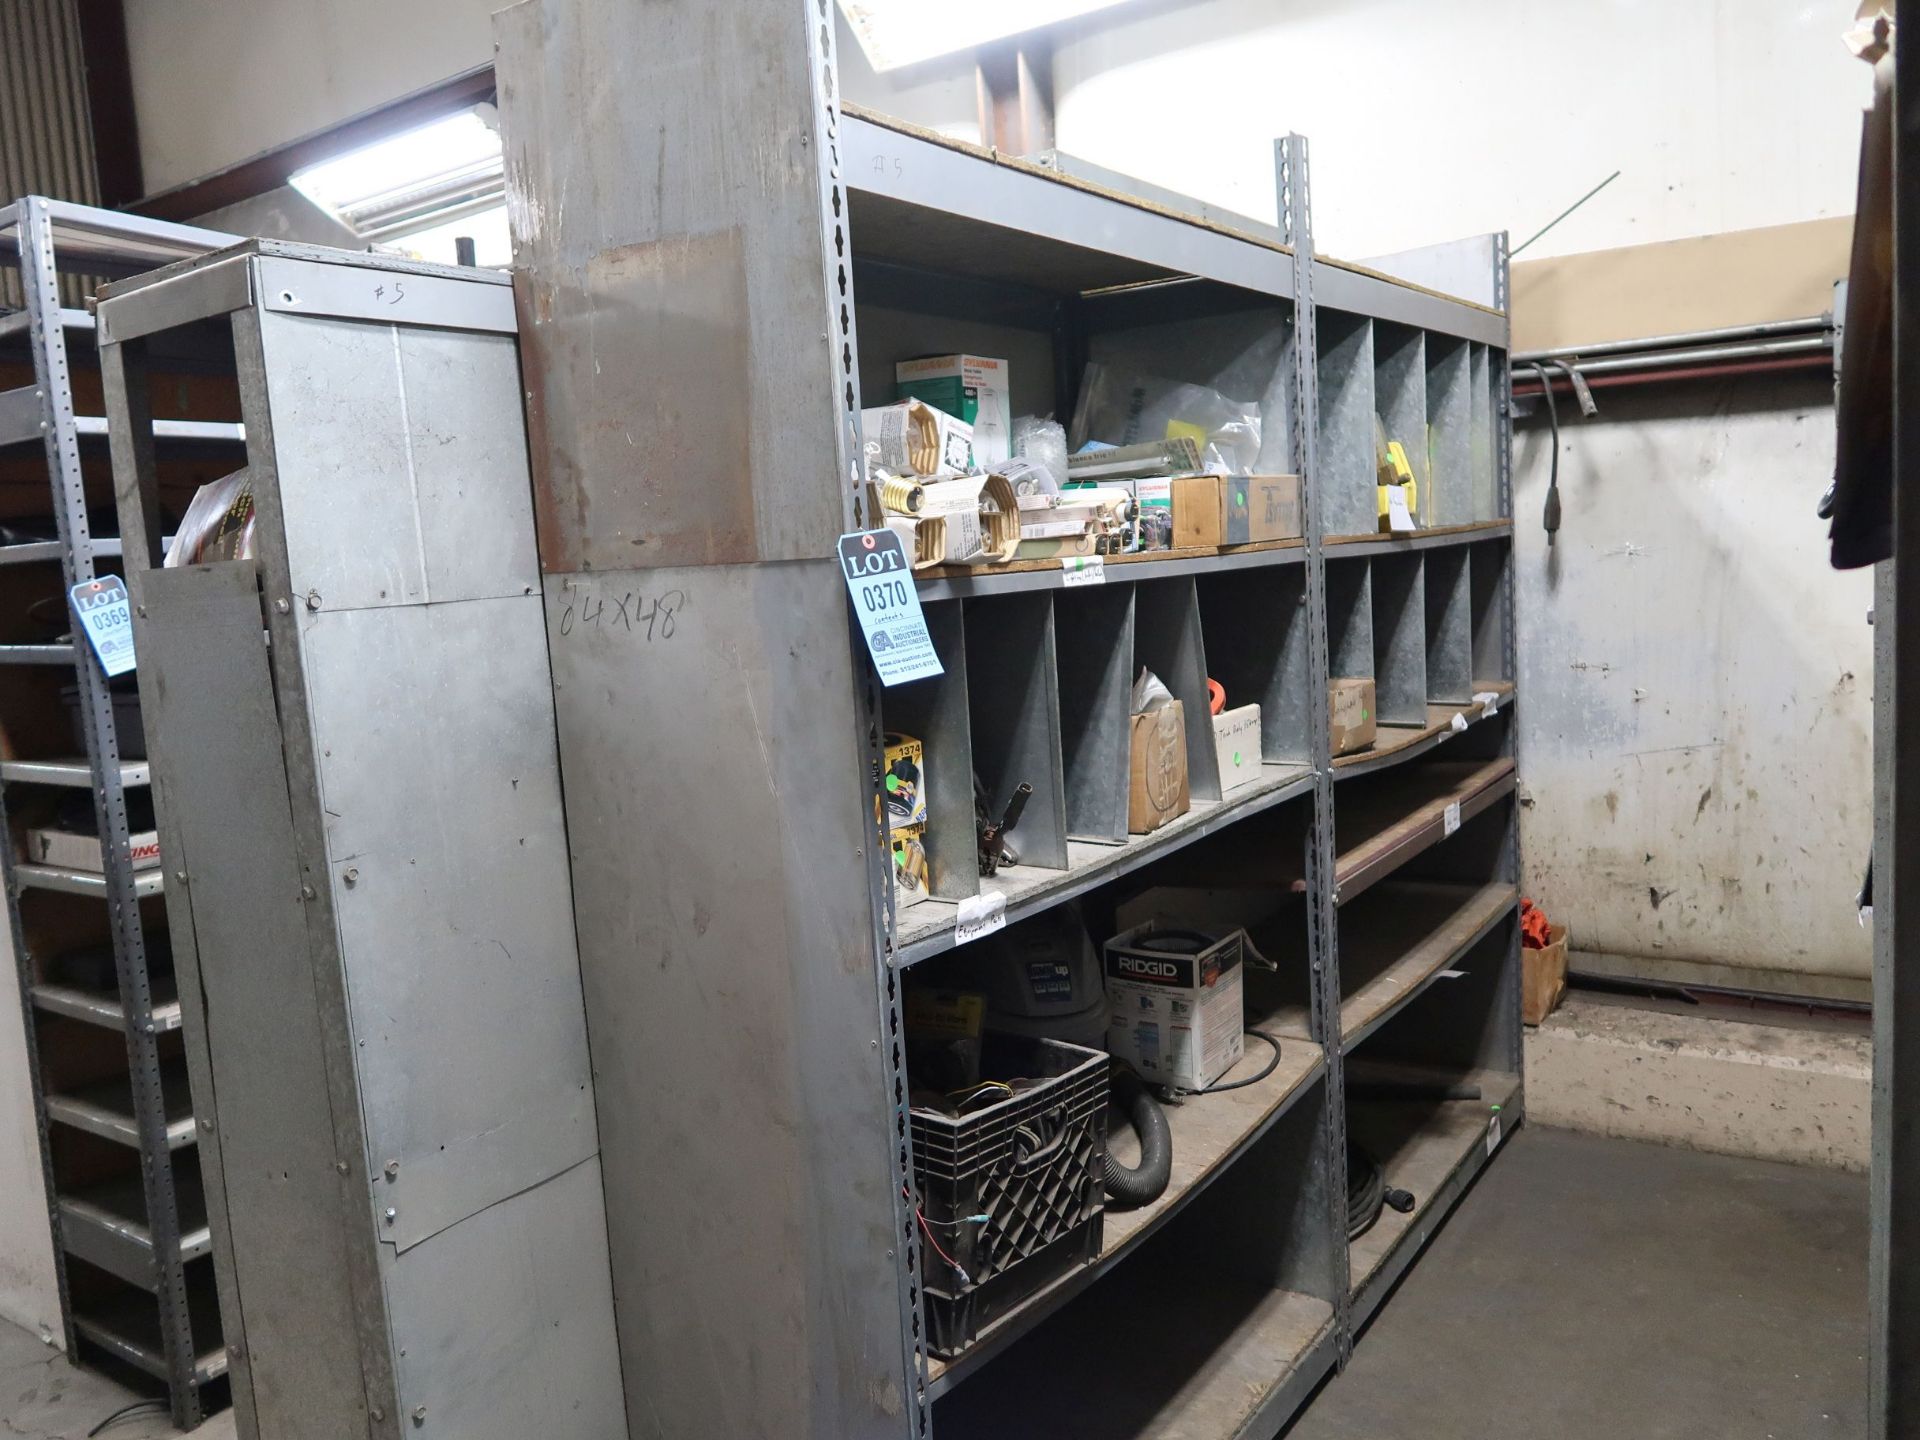 SECTIONS MISCELLANEOUS SIZE STEEL SHELVING **DELAY REMOVAL - PICK UP ON 4-17-2018** - Image 3 of 6